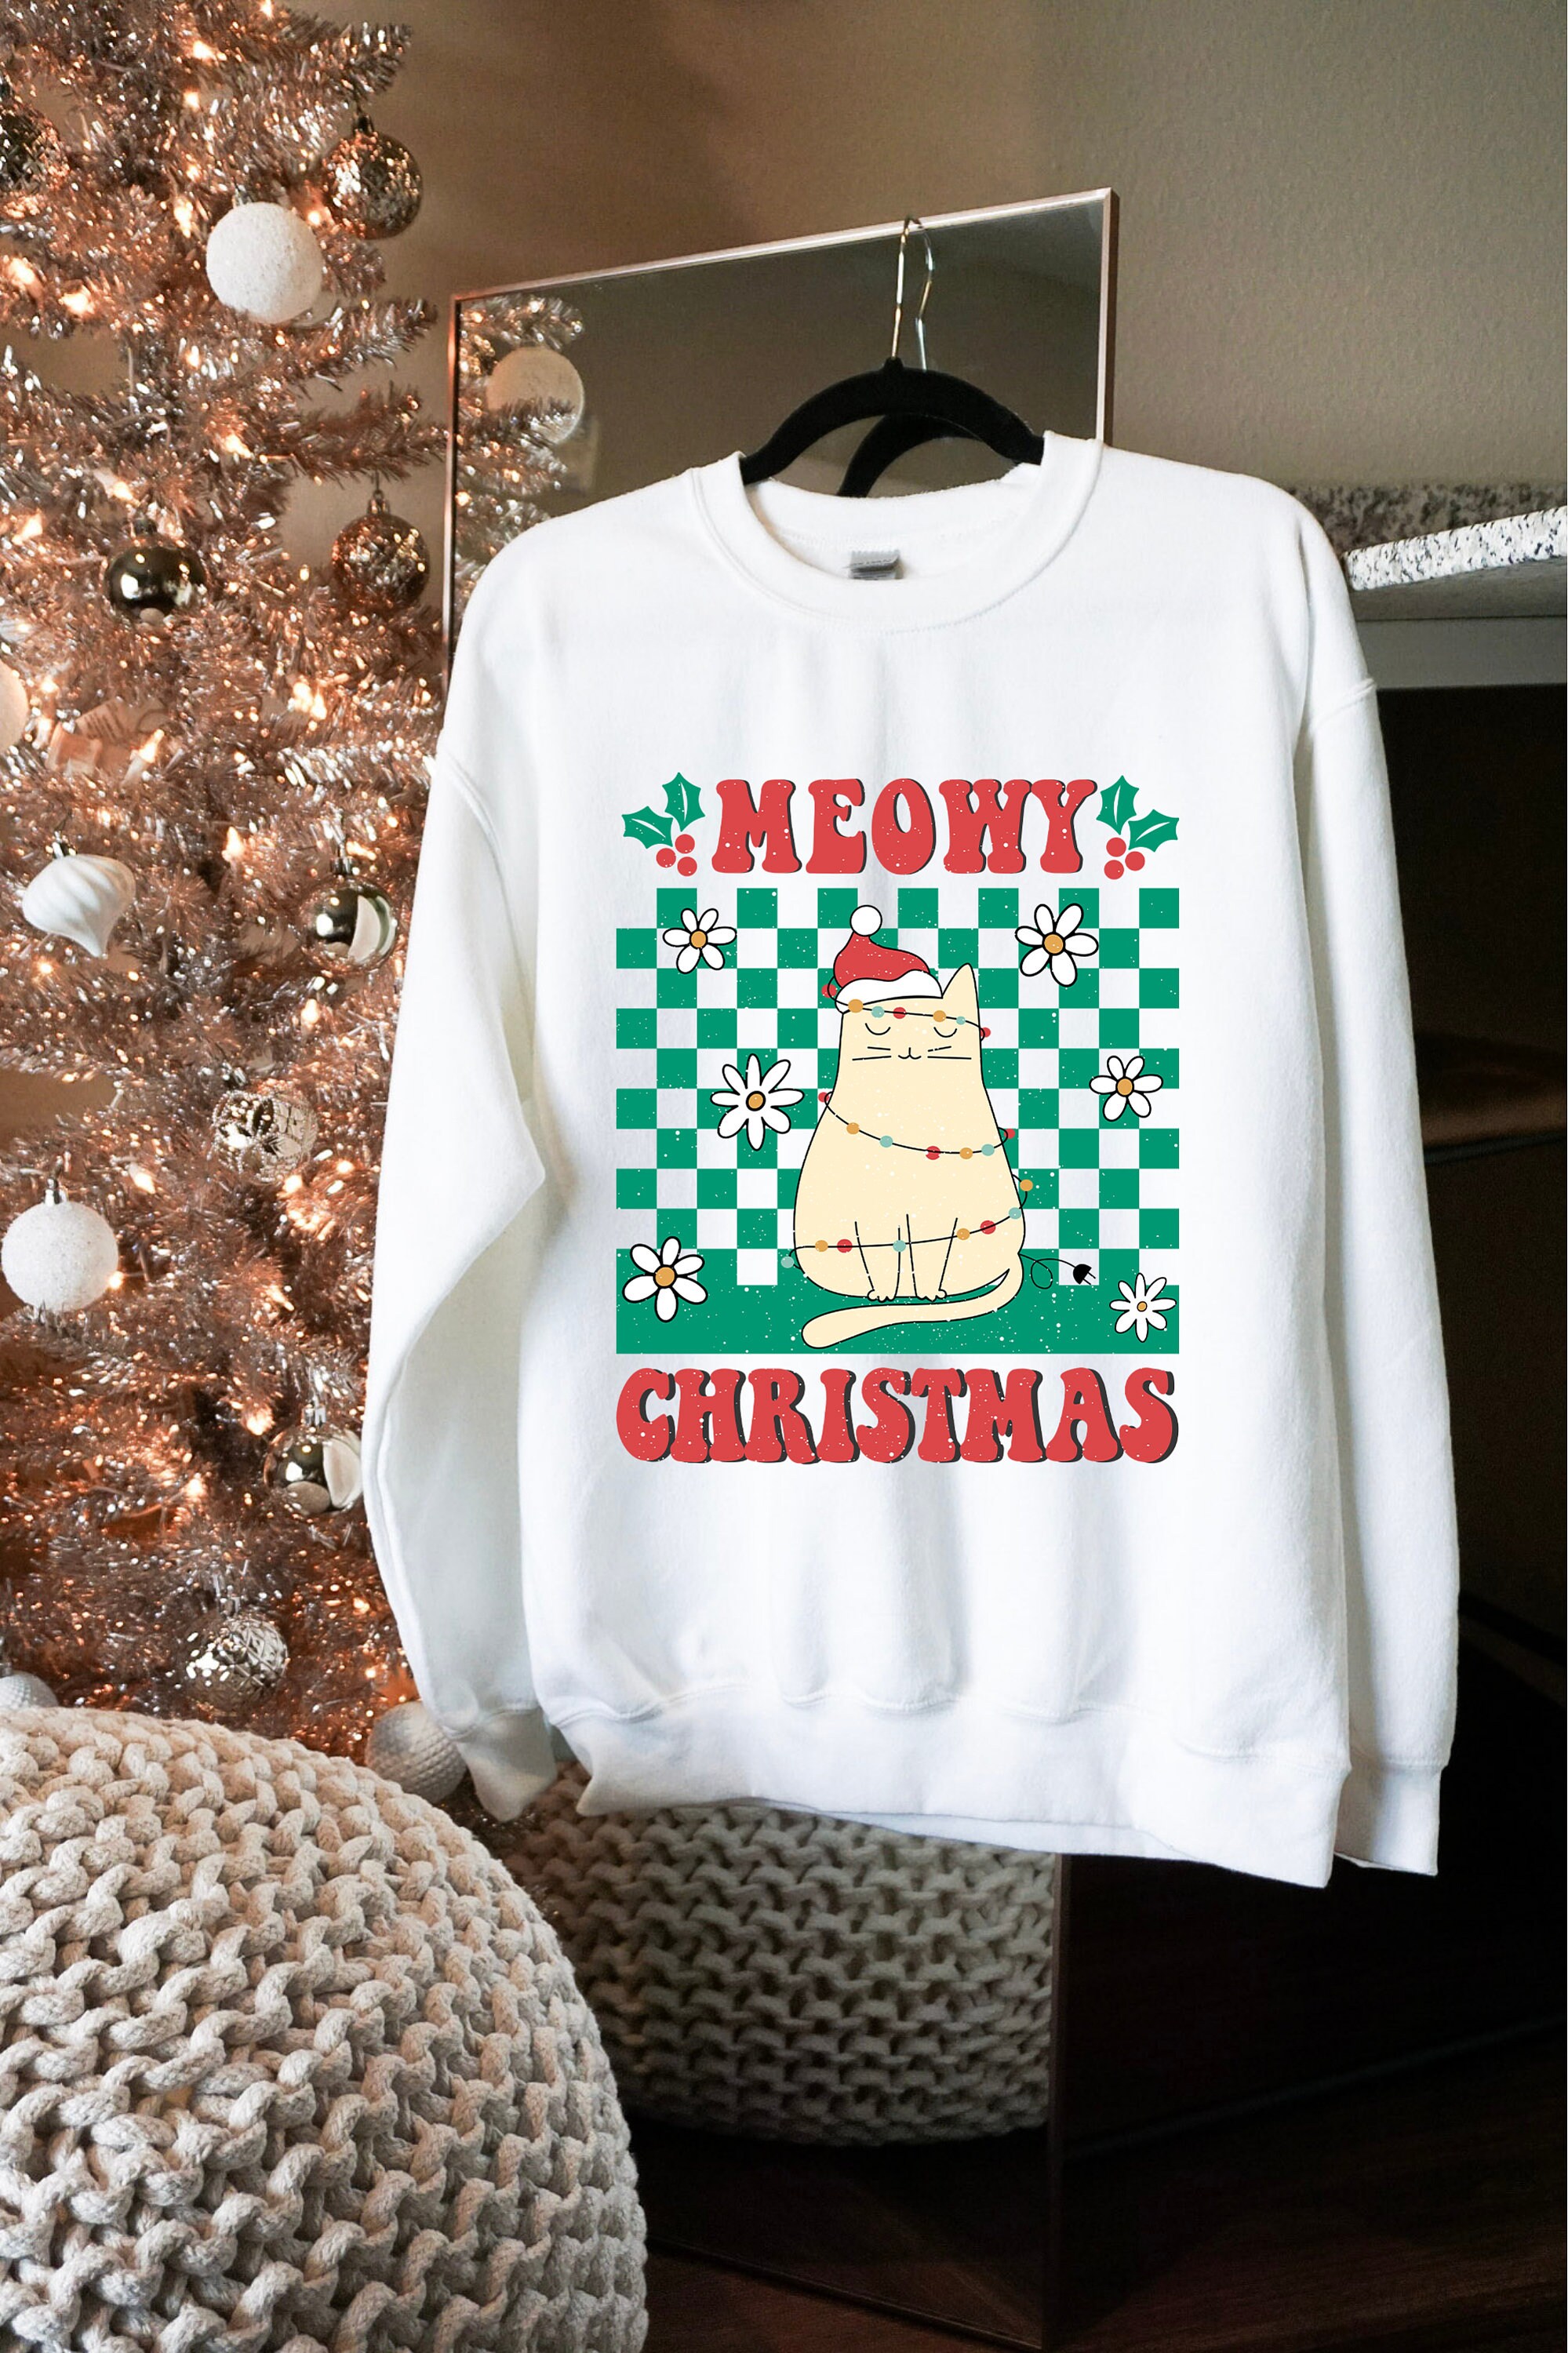 Discover Meowy Christmas Sweatshirt, Ugly Sweater, Classic Christmas Vintage, Xmas Outfit, Cat lover gift, Hippie Christmas Crewneck, vintage graphic